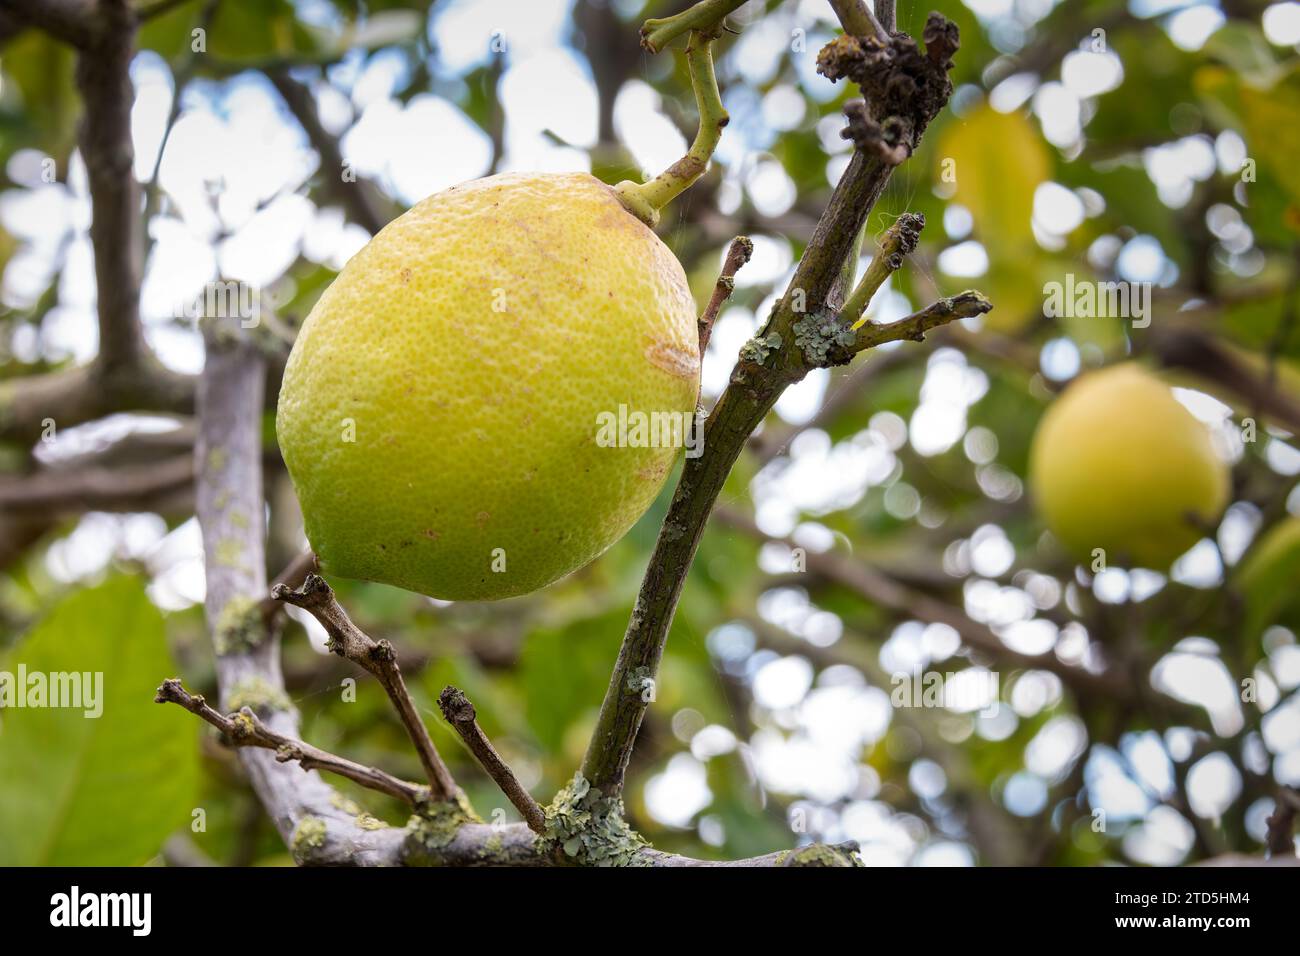 A lemon ripening on its tree in an organically grown orchard. Stock Photo